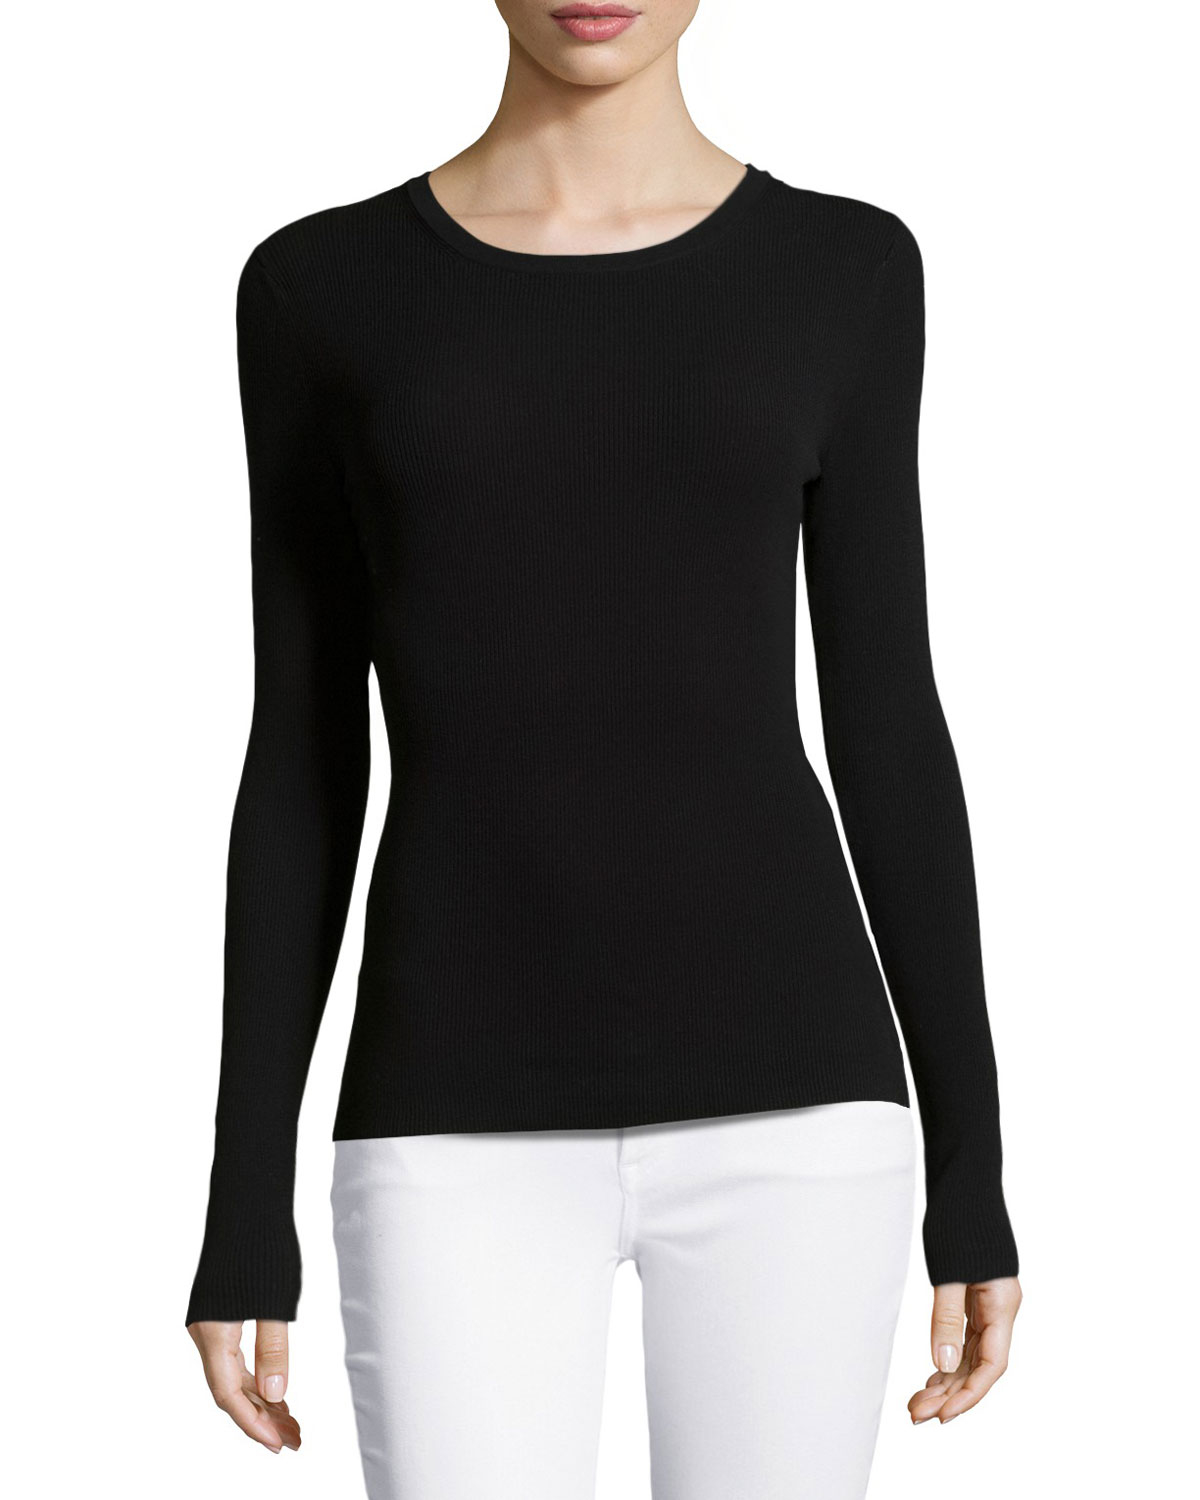 Download Lyst - Michael Kors Long-Sleeved Jersey Fitted Top in Black